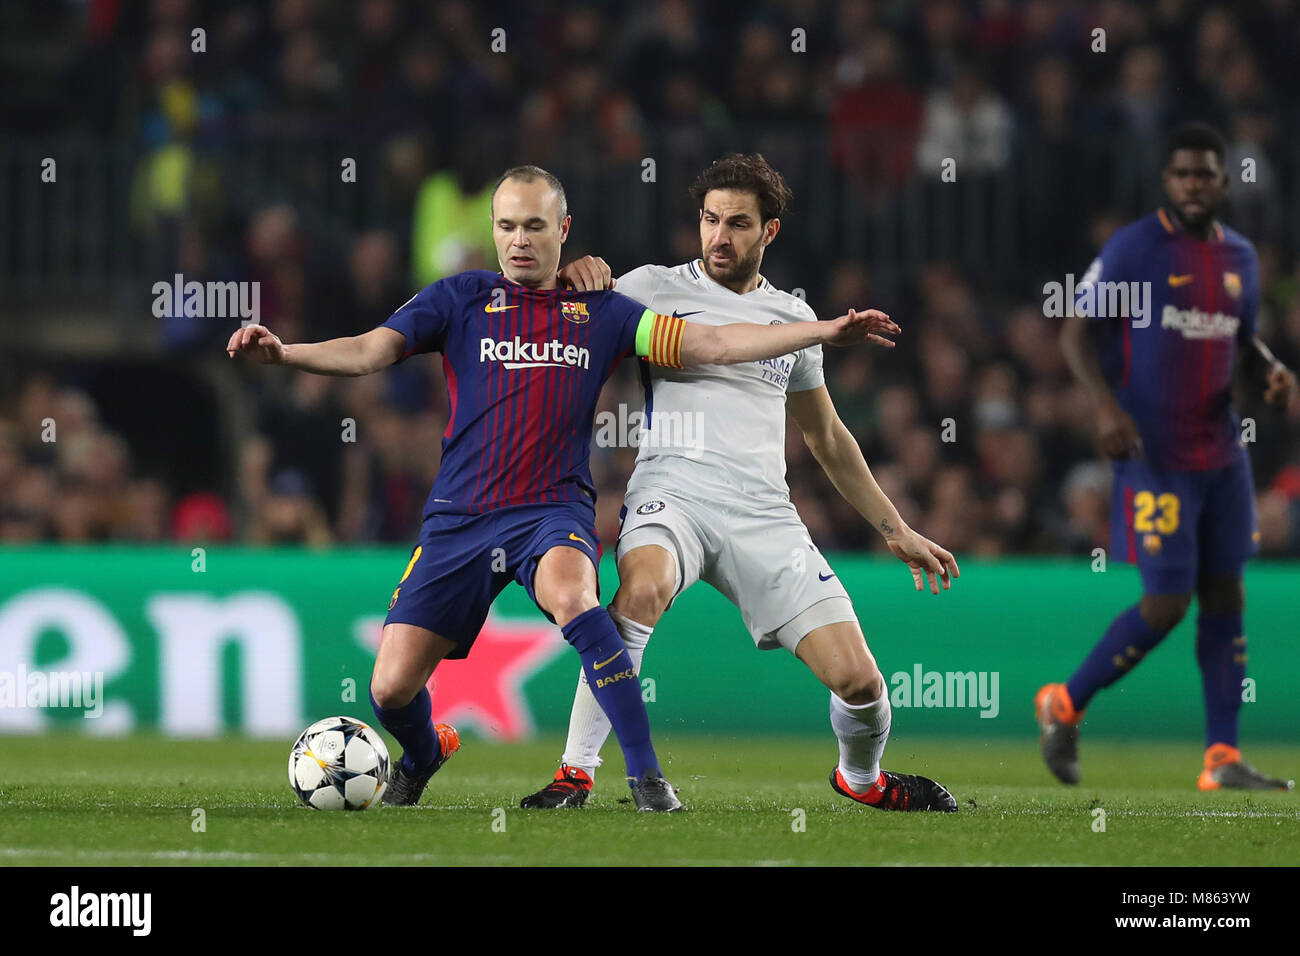 March 14, 2018 - Barcelona, Spain - ANDRES INIESTA of FC Barcelona duels for the ball with CESC FABREGAS of Chelsea FC during the UEFA Champions League, round of 16, 2nd leg football match between FC Barcelona and Chelsea FC at Camp Nou stadium. (Credit Image: © Manuel Blondeau via ZUMA Wire) Stock Photo